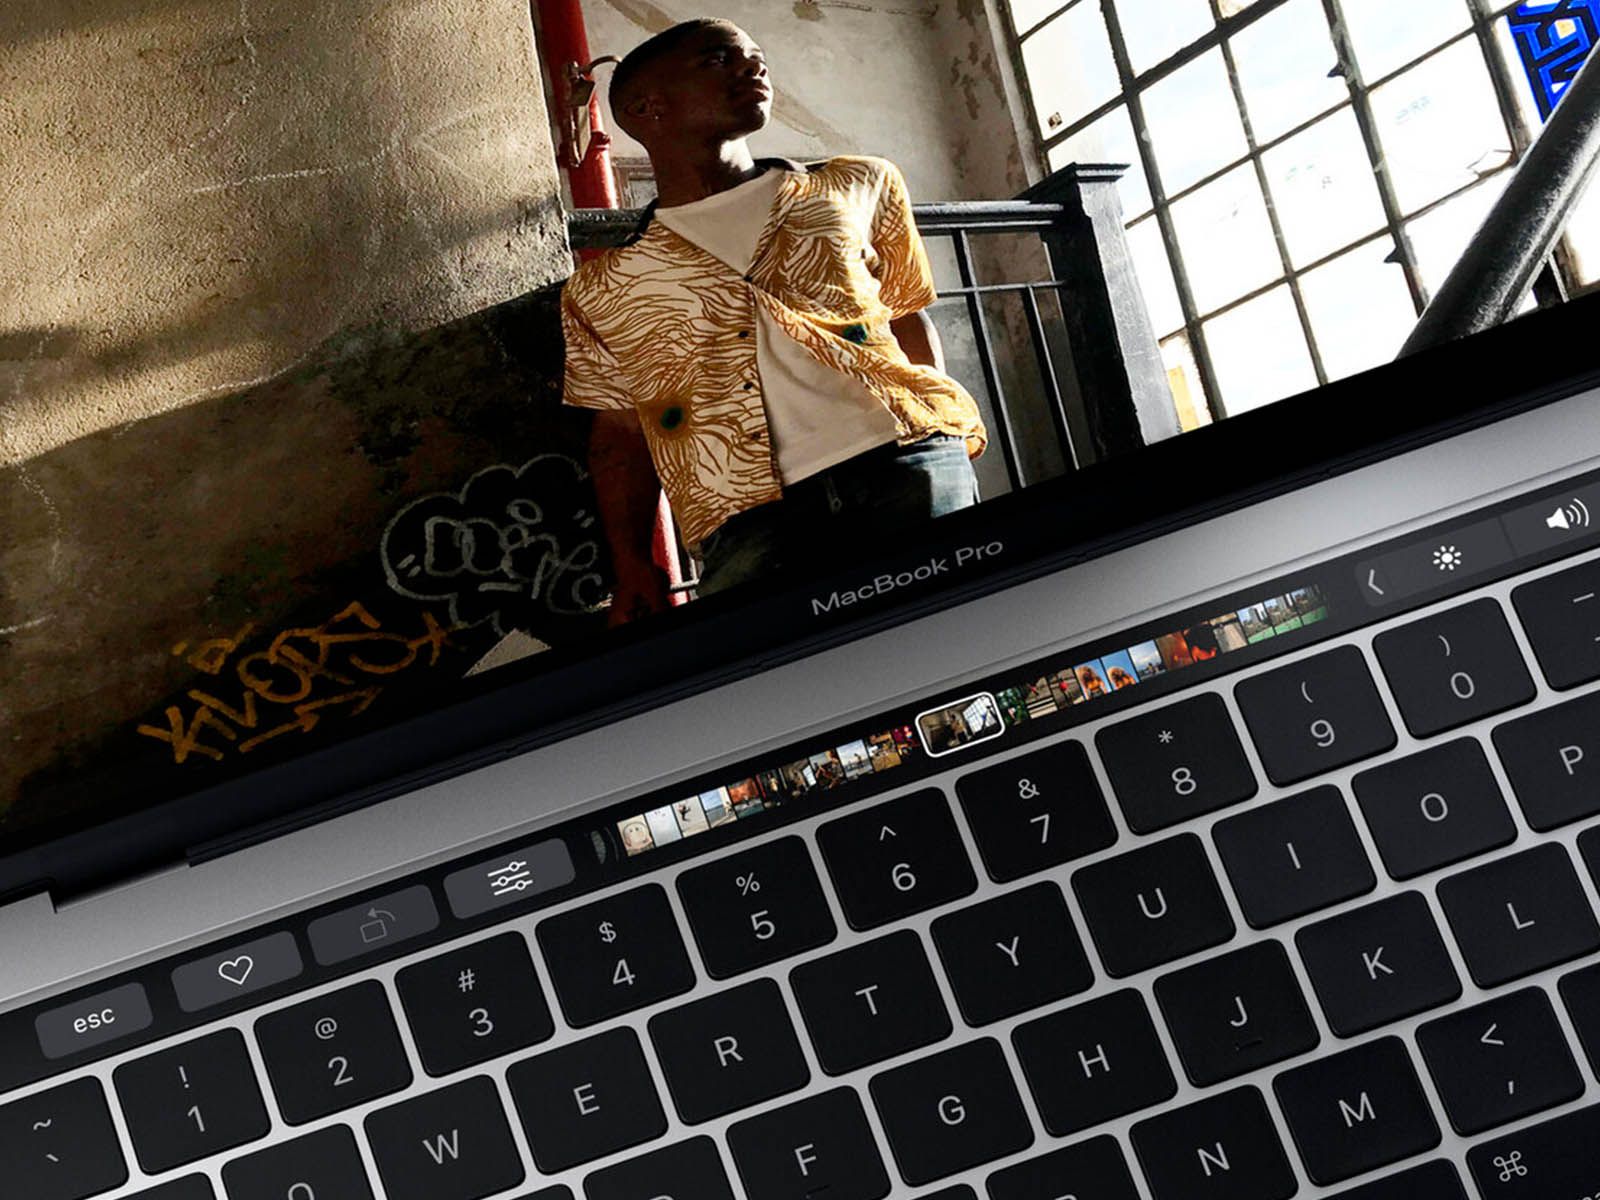 Apple is developing a MacBook Pro with touchscreen display